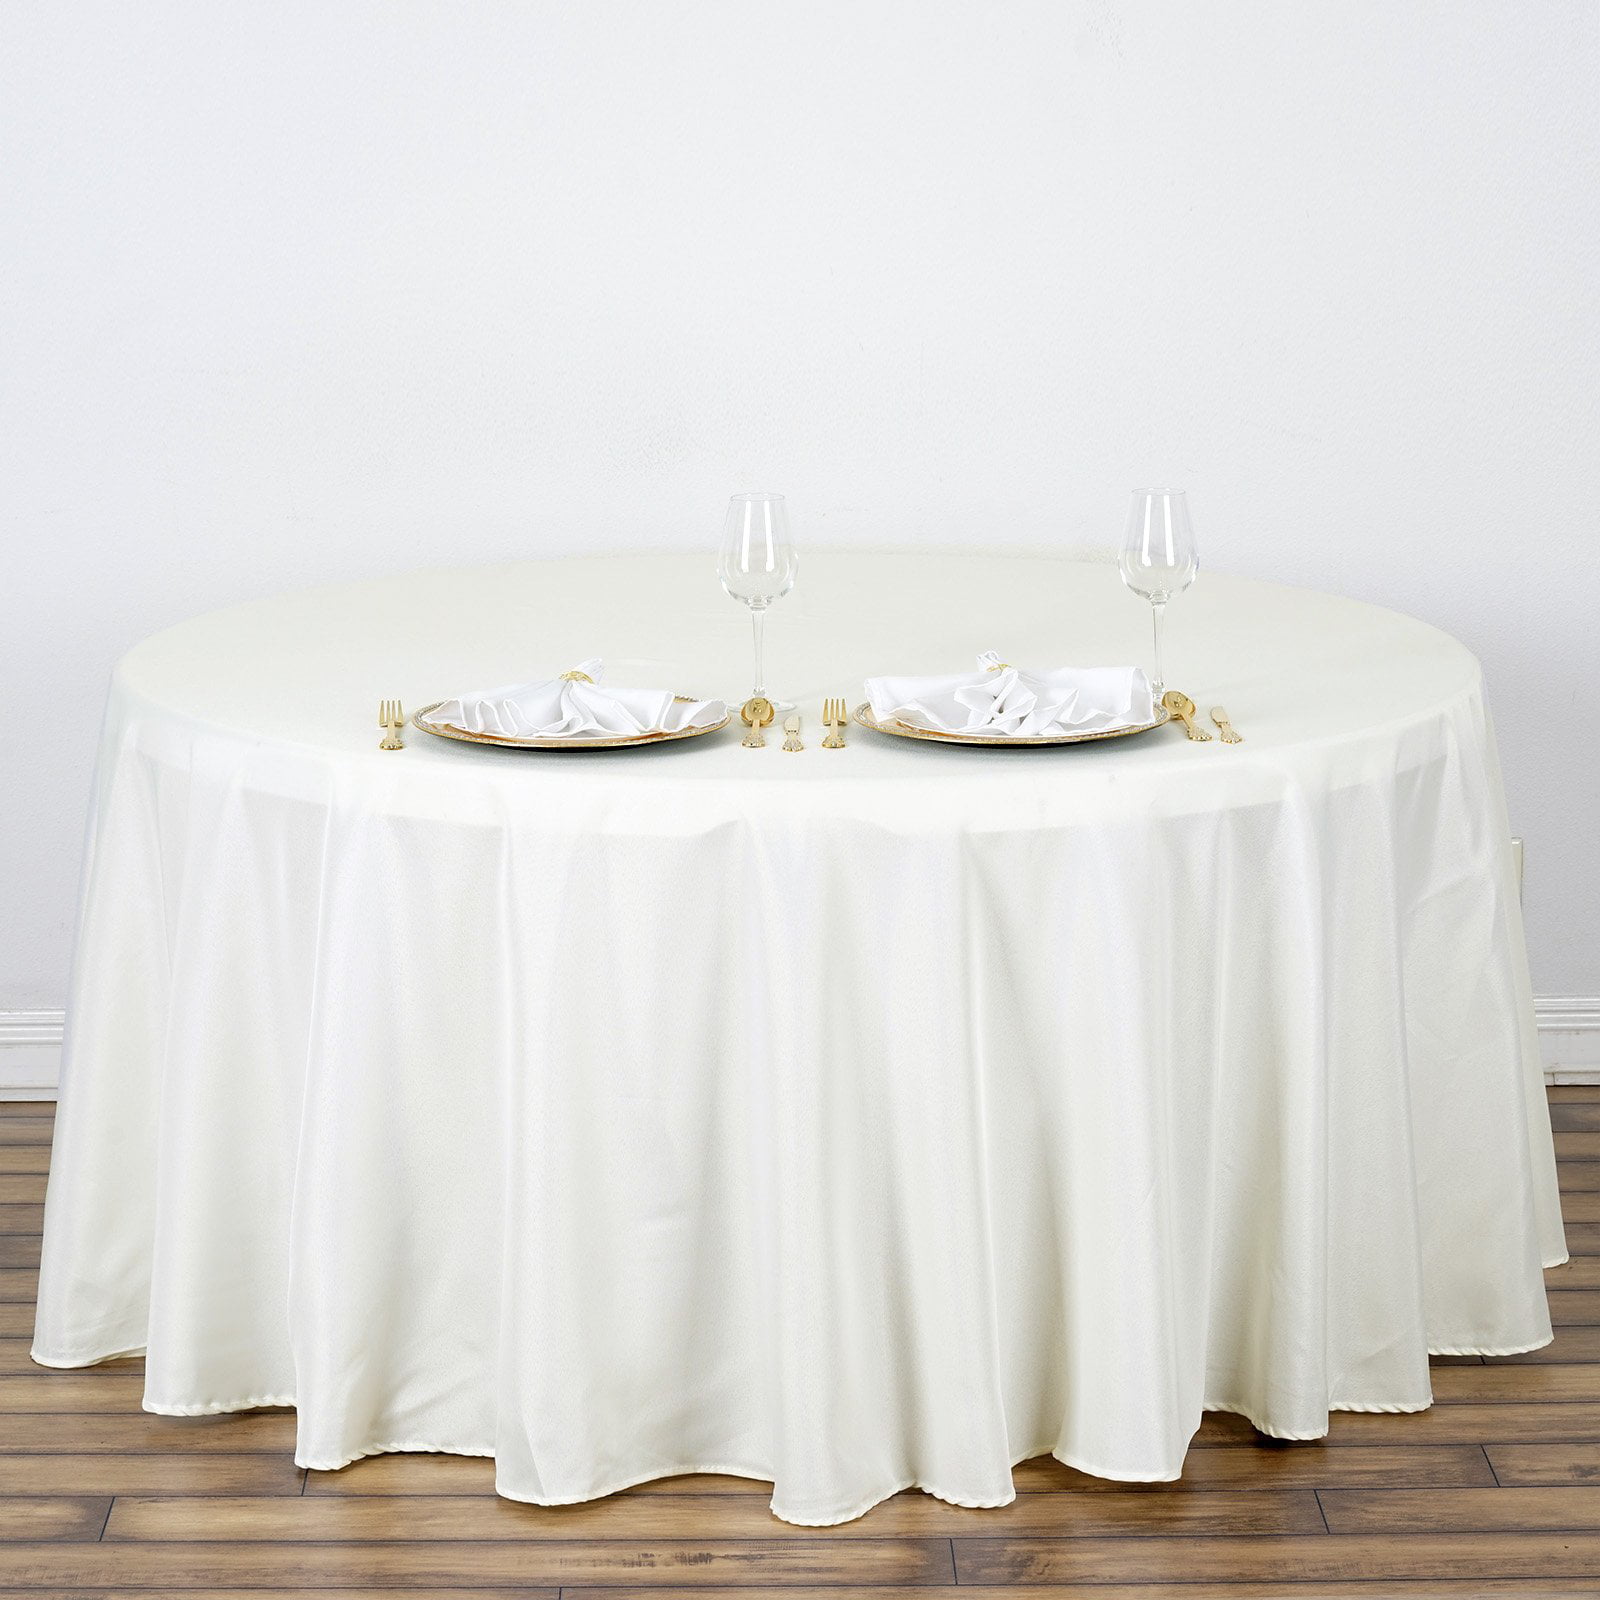 IVORY Polyester 90x156/" TABLECLOTH Rounded Corners Wedding Party Linens Dinner